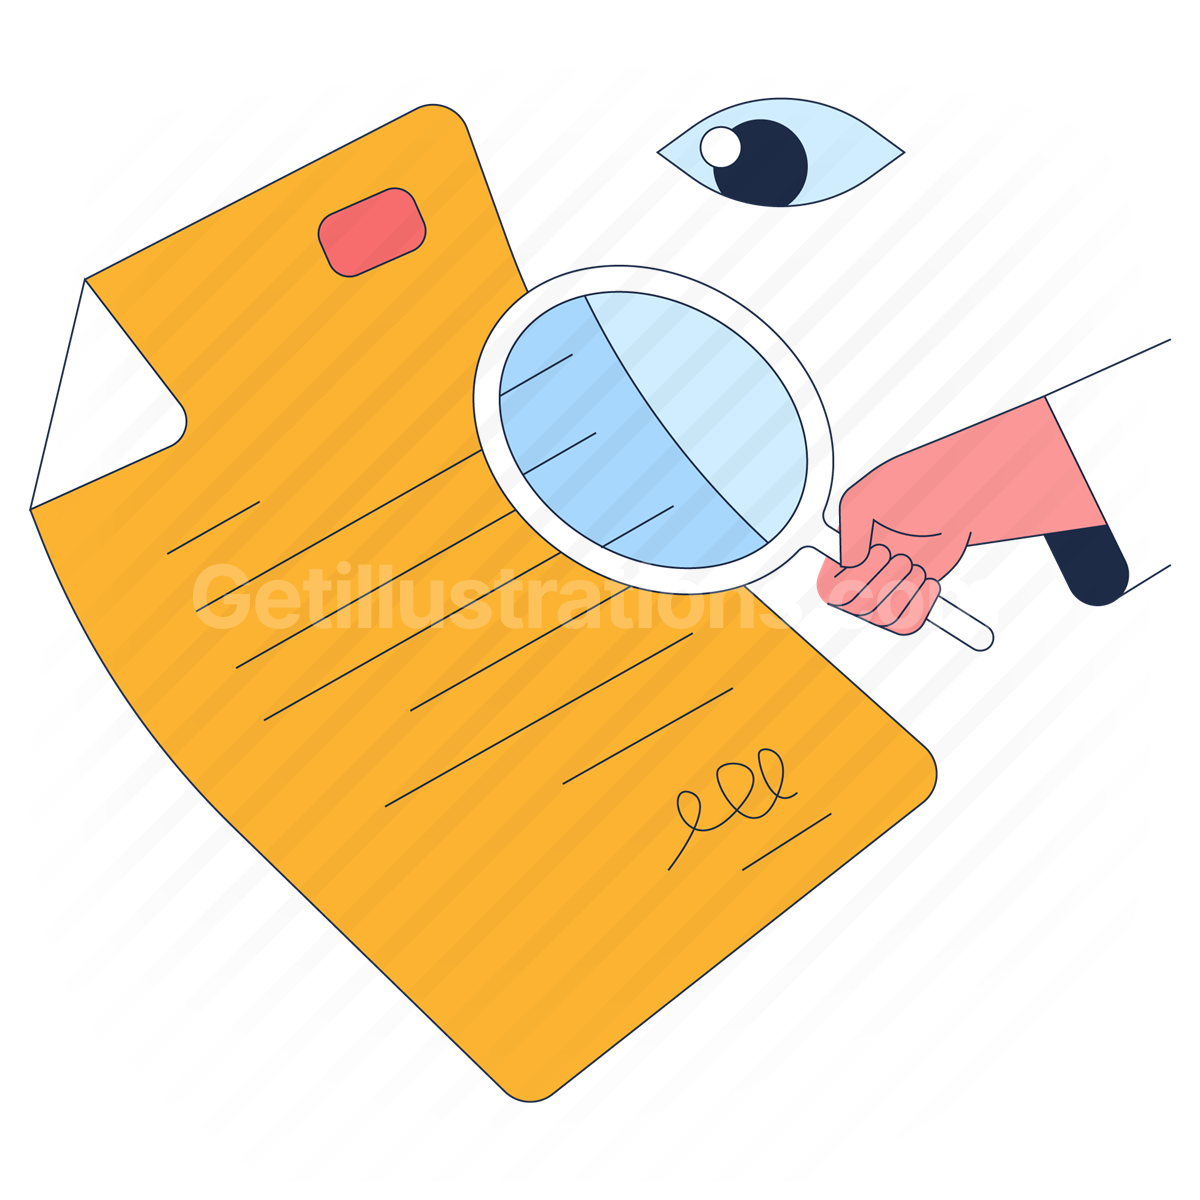 document, paper, page, find, magnifier, view, eye, hand gesture